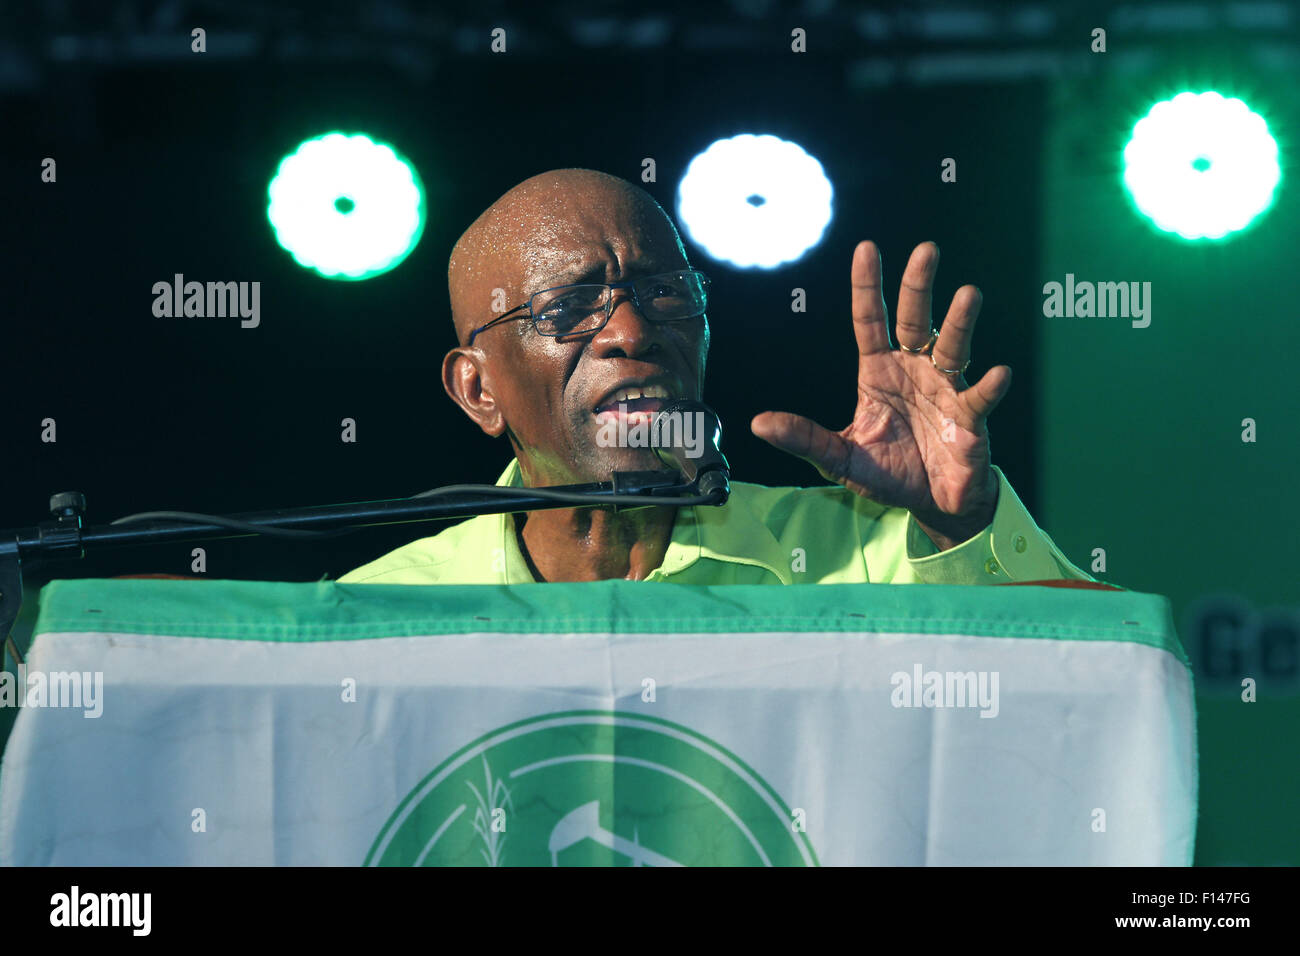 ST JOSEPH, TRINIDAD - AUGUST 25: Austin 'Jack' Warner, Leader of the Independent Liberal Party, speaks at an ILP public meeting in First Capital Park as part of the General Elections campaign on August 25, 2015 in St Joseph, Trinidad.  Mr. Warner is a former FIFA Vice President and a candidate of the ILP to represent the Chaguanas East constituency when elections are held on September 07, 2015.  (Photo by Sean Drakes/Alamy Live News) Stock Photo